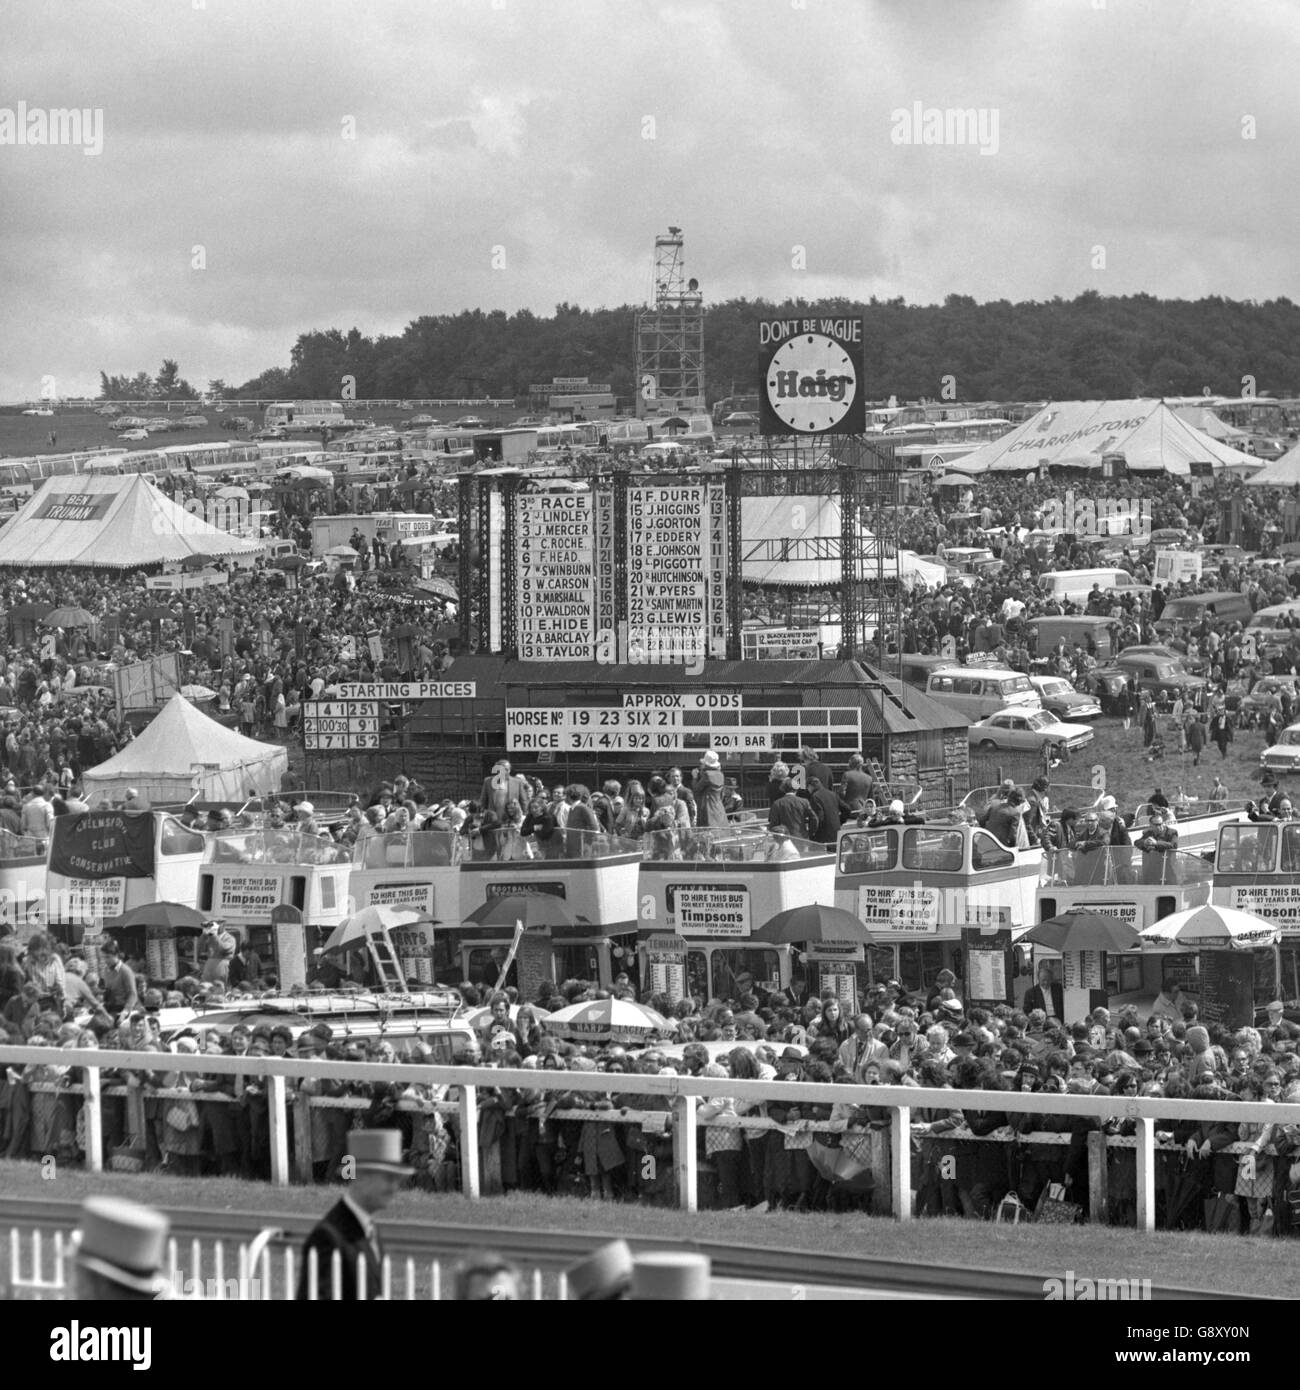 Epsom Derby. Scenes from Epsom on Derby Day. Stock Photo